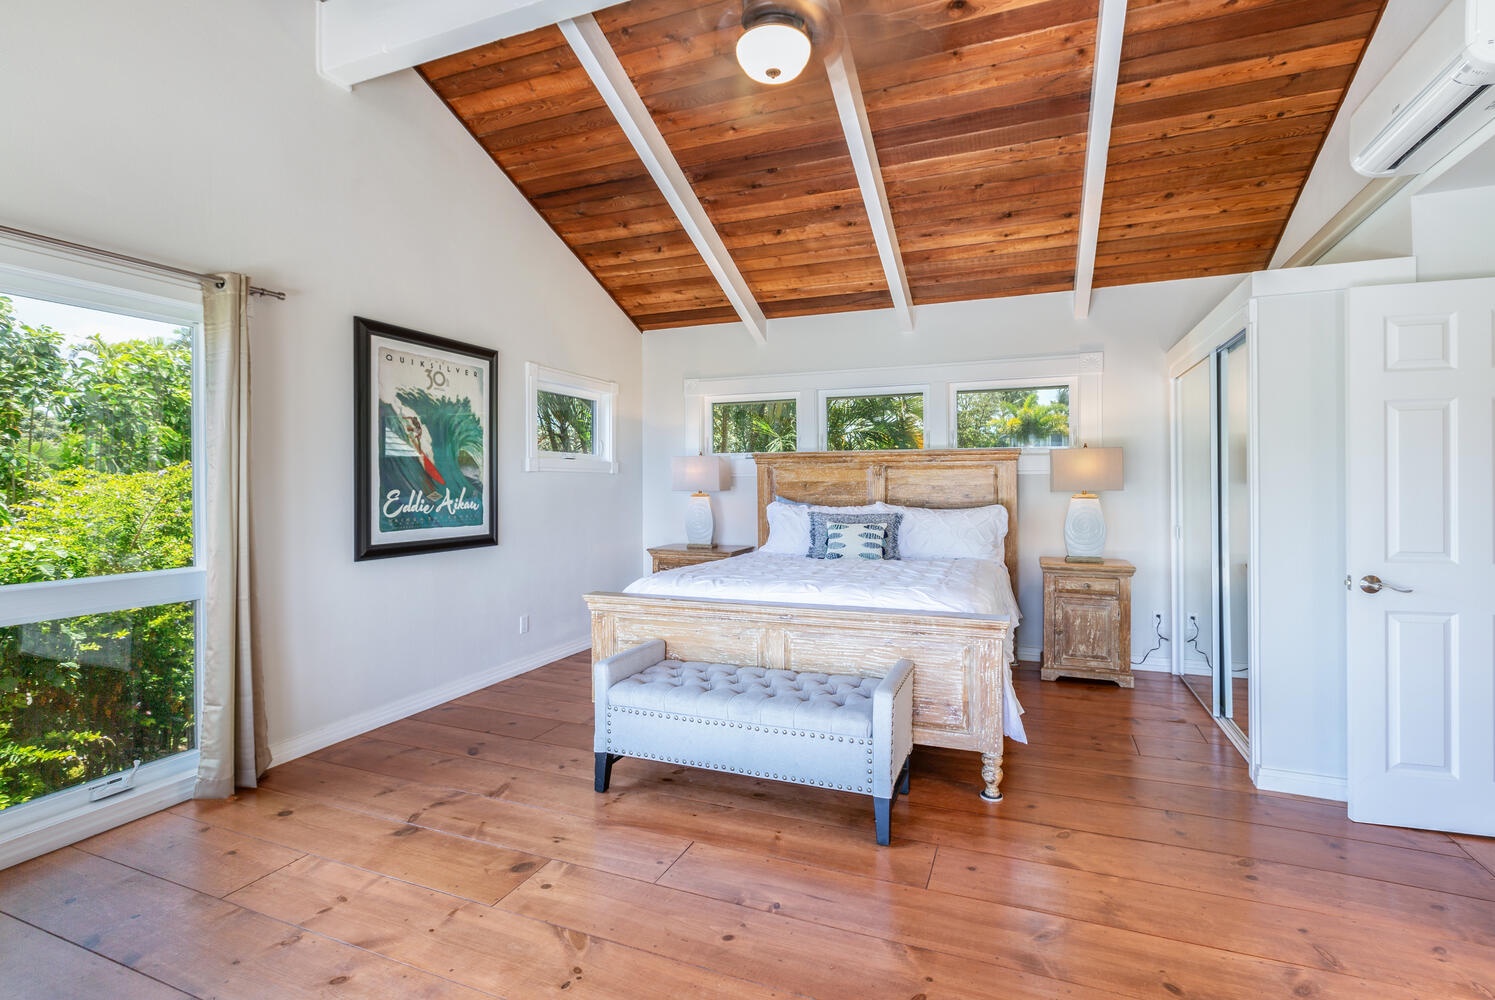 Princeville Vacation Rentals, Wai Lani - Welcome to the Primary Suite. Your private sanctuary with a plush king bed, ensuite bath, TV, and lanai.